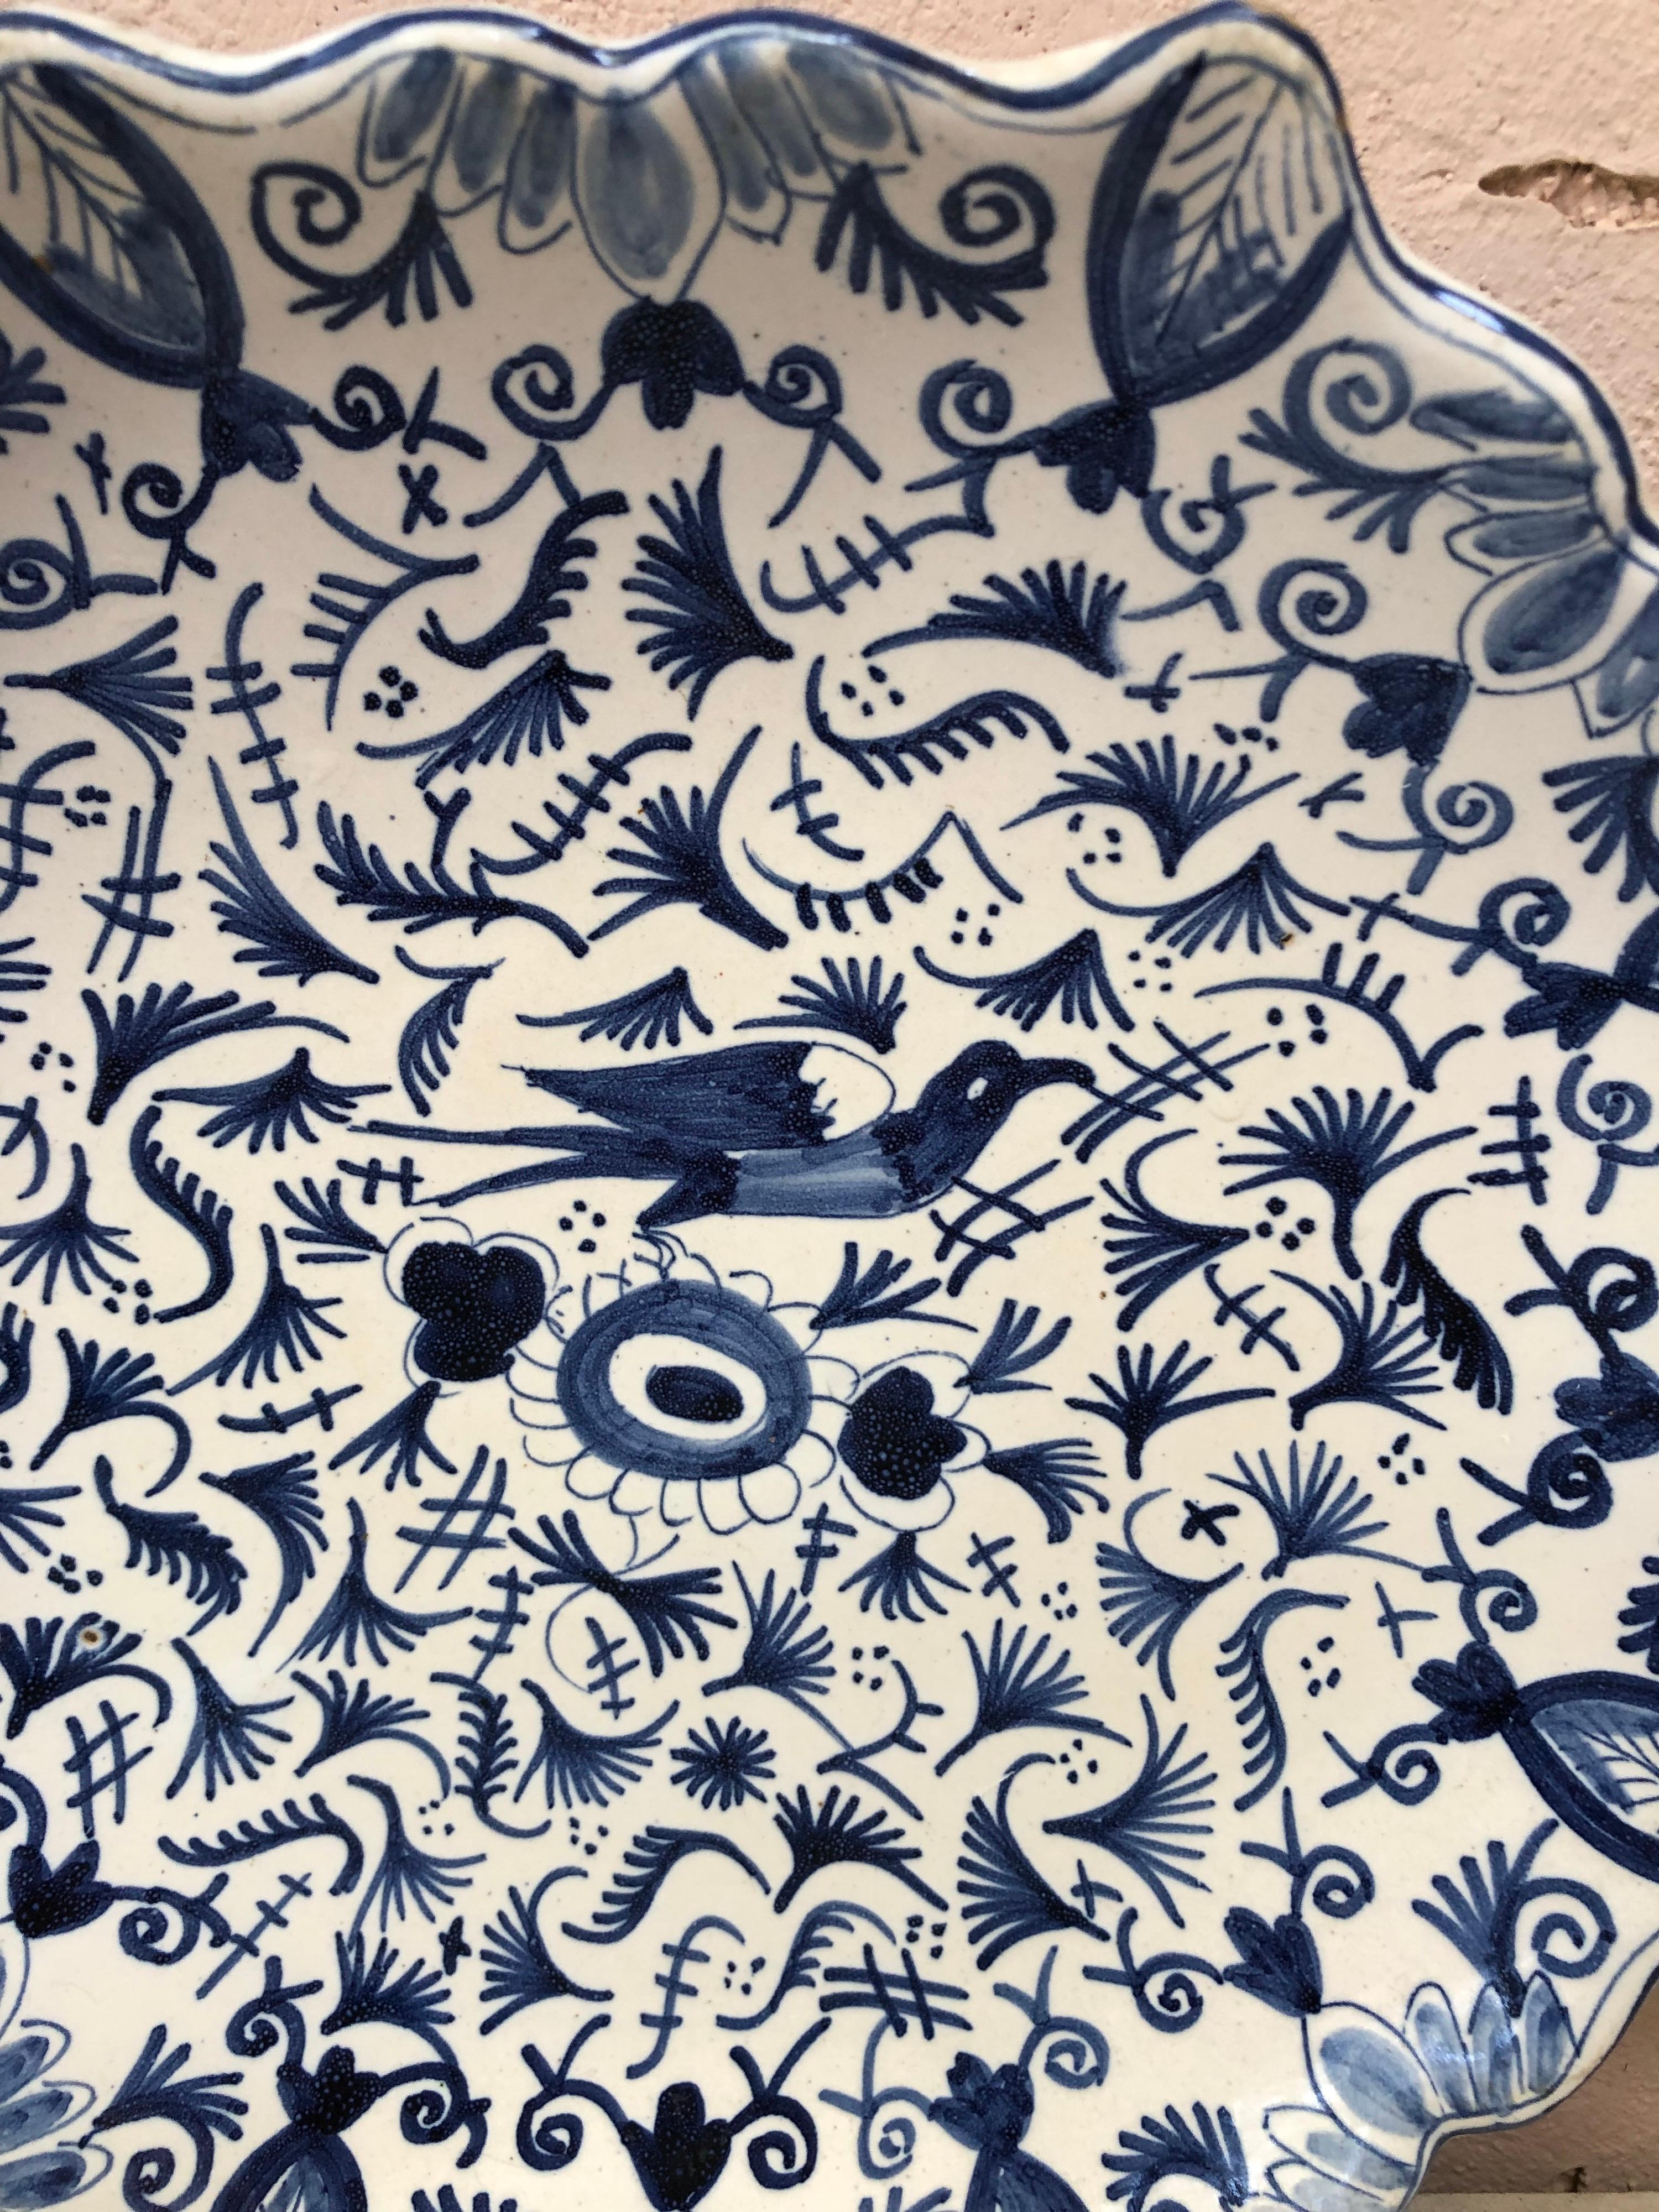 Blue & White Faience handled platter Circa 1920.
Geometrical pattern and bird on the center.